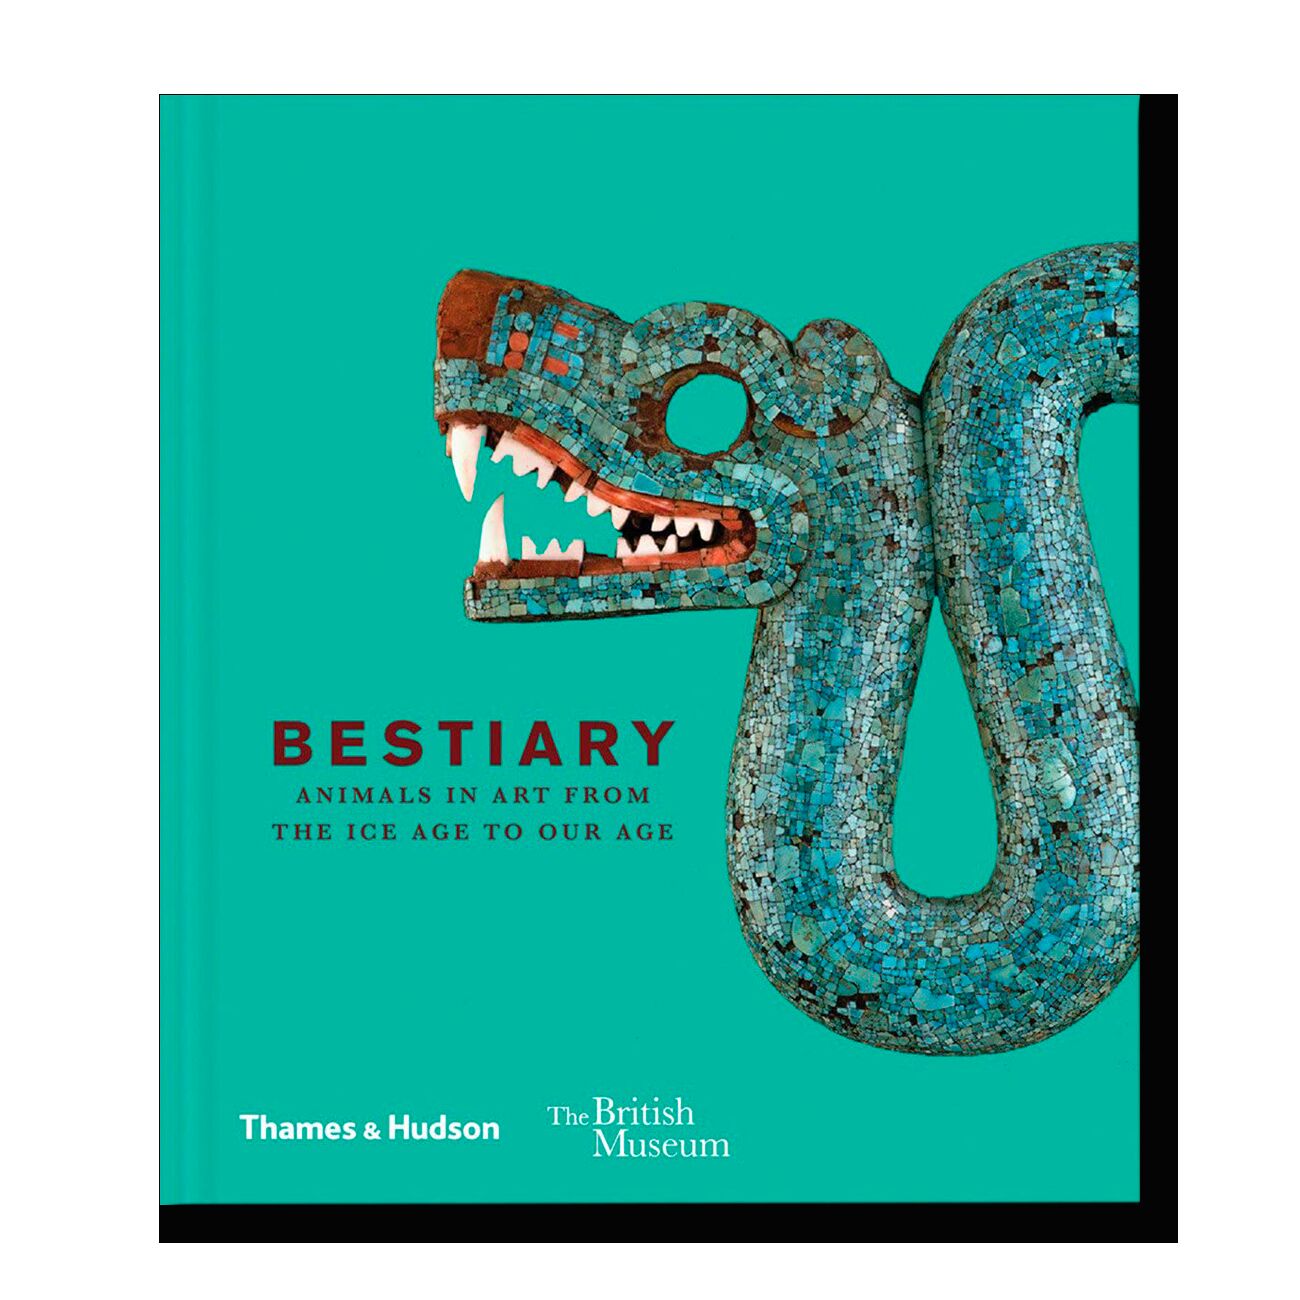 Bestiary: Animals in Art from the Ice Age to Our Age